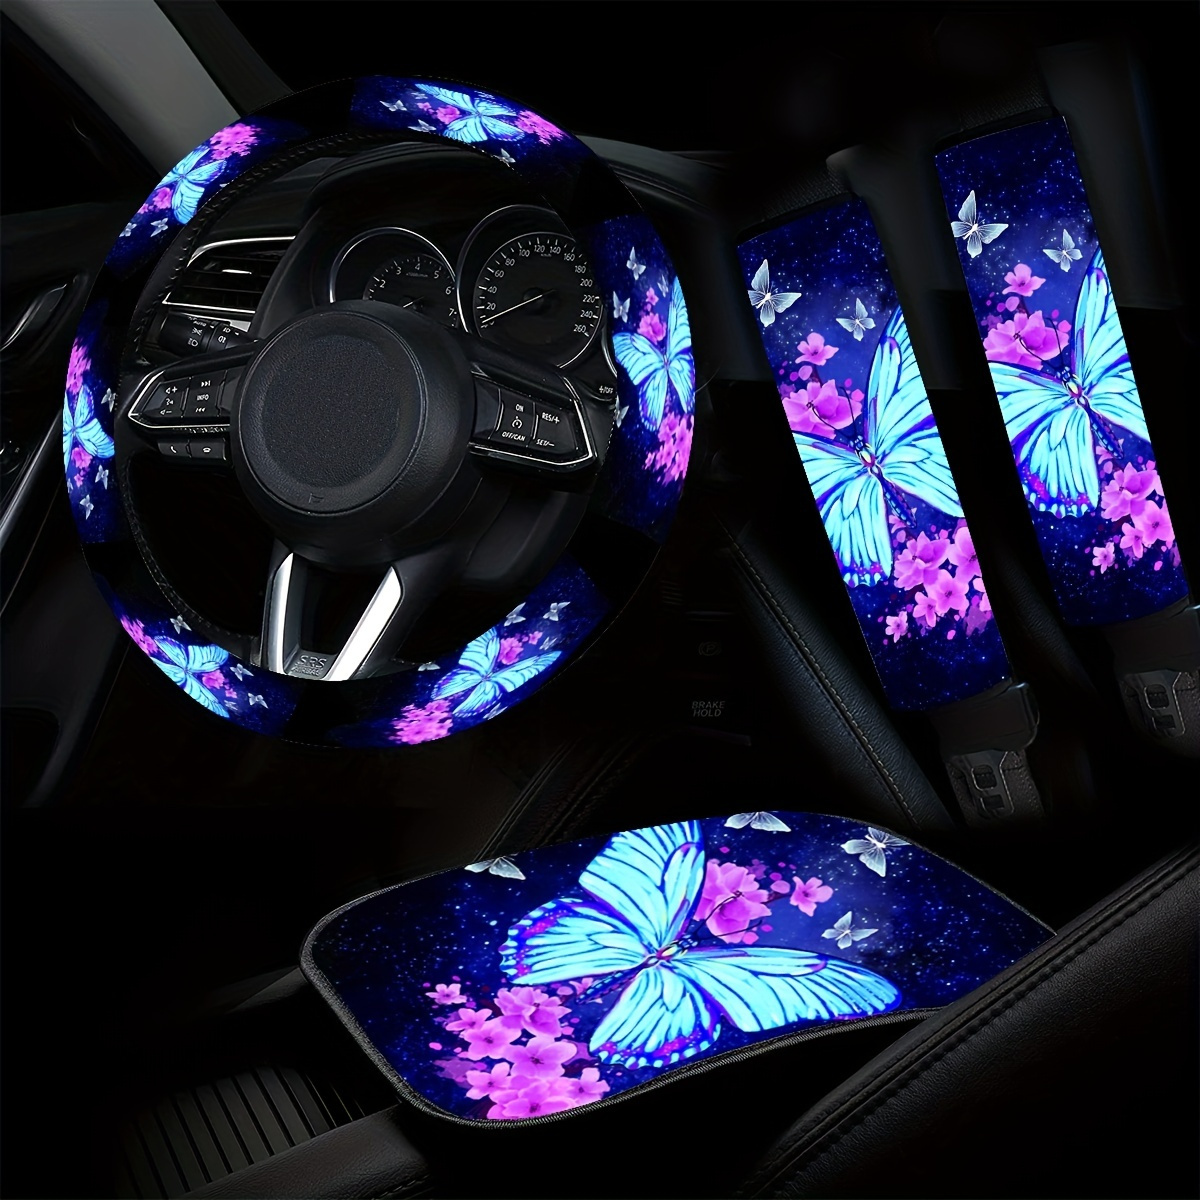 

Blue Big Butterfly Printed Car Interior Accessories 4-piece Set (1 Steering Wheel Cover + 1 Central Armrest Pad + 2 Seat Belt Shoulder Protector)